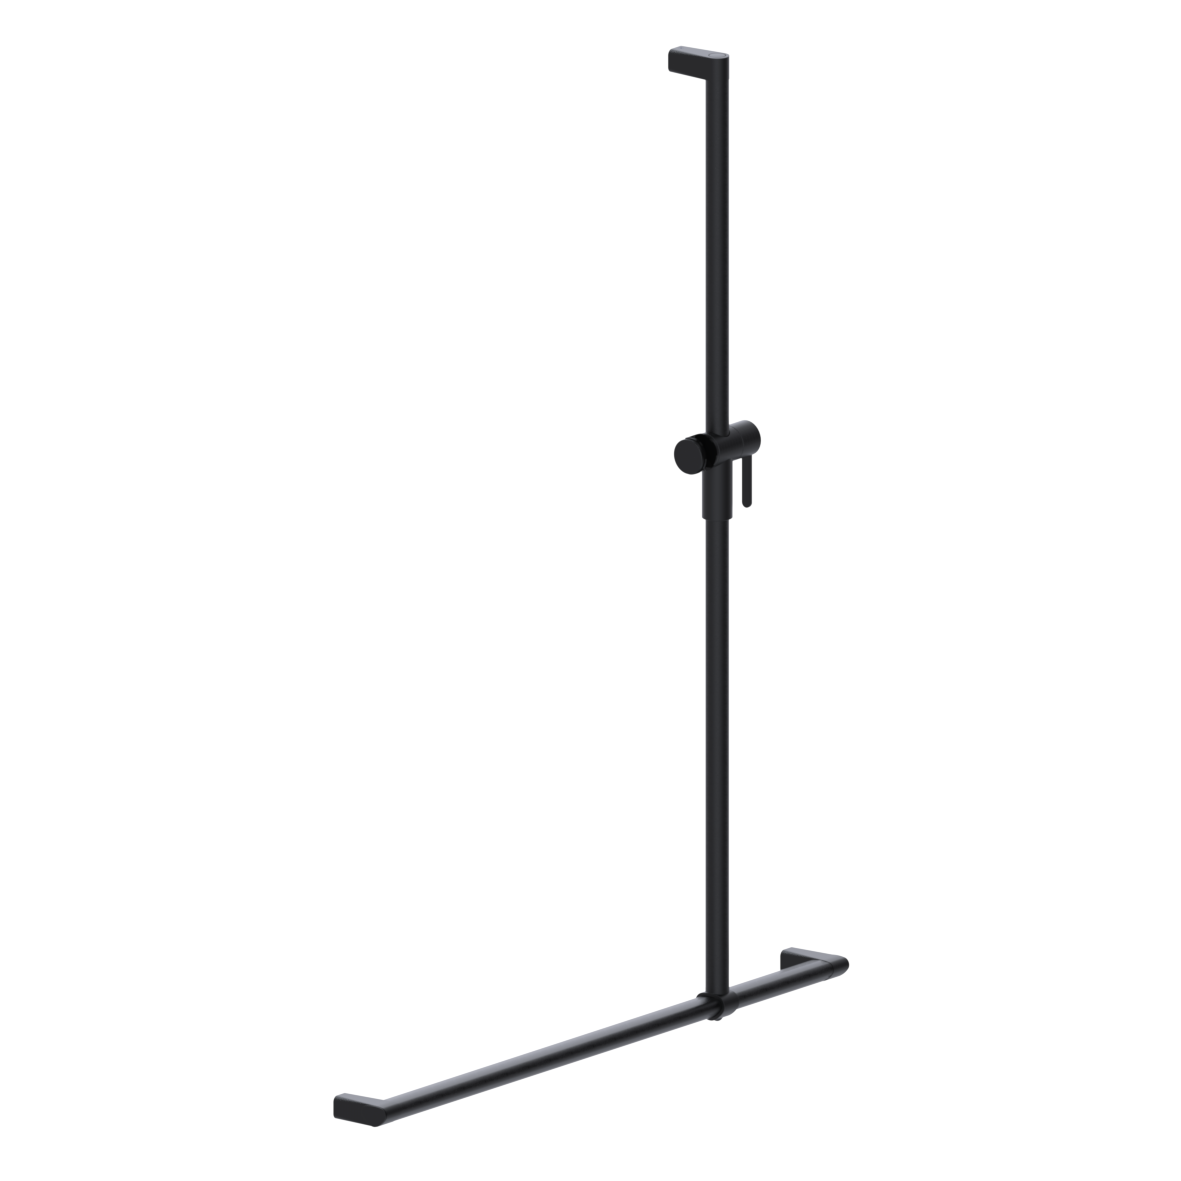 Cavere Care Shower handrail, with movable shower handrail, left and right, 900 x 1200 mm, single-point mounting, Cavere Carbon black